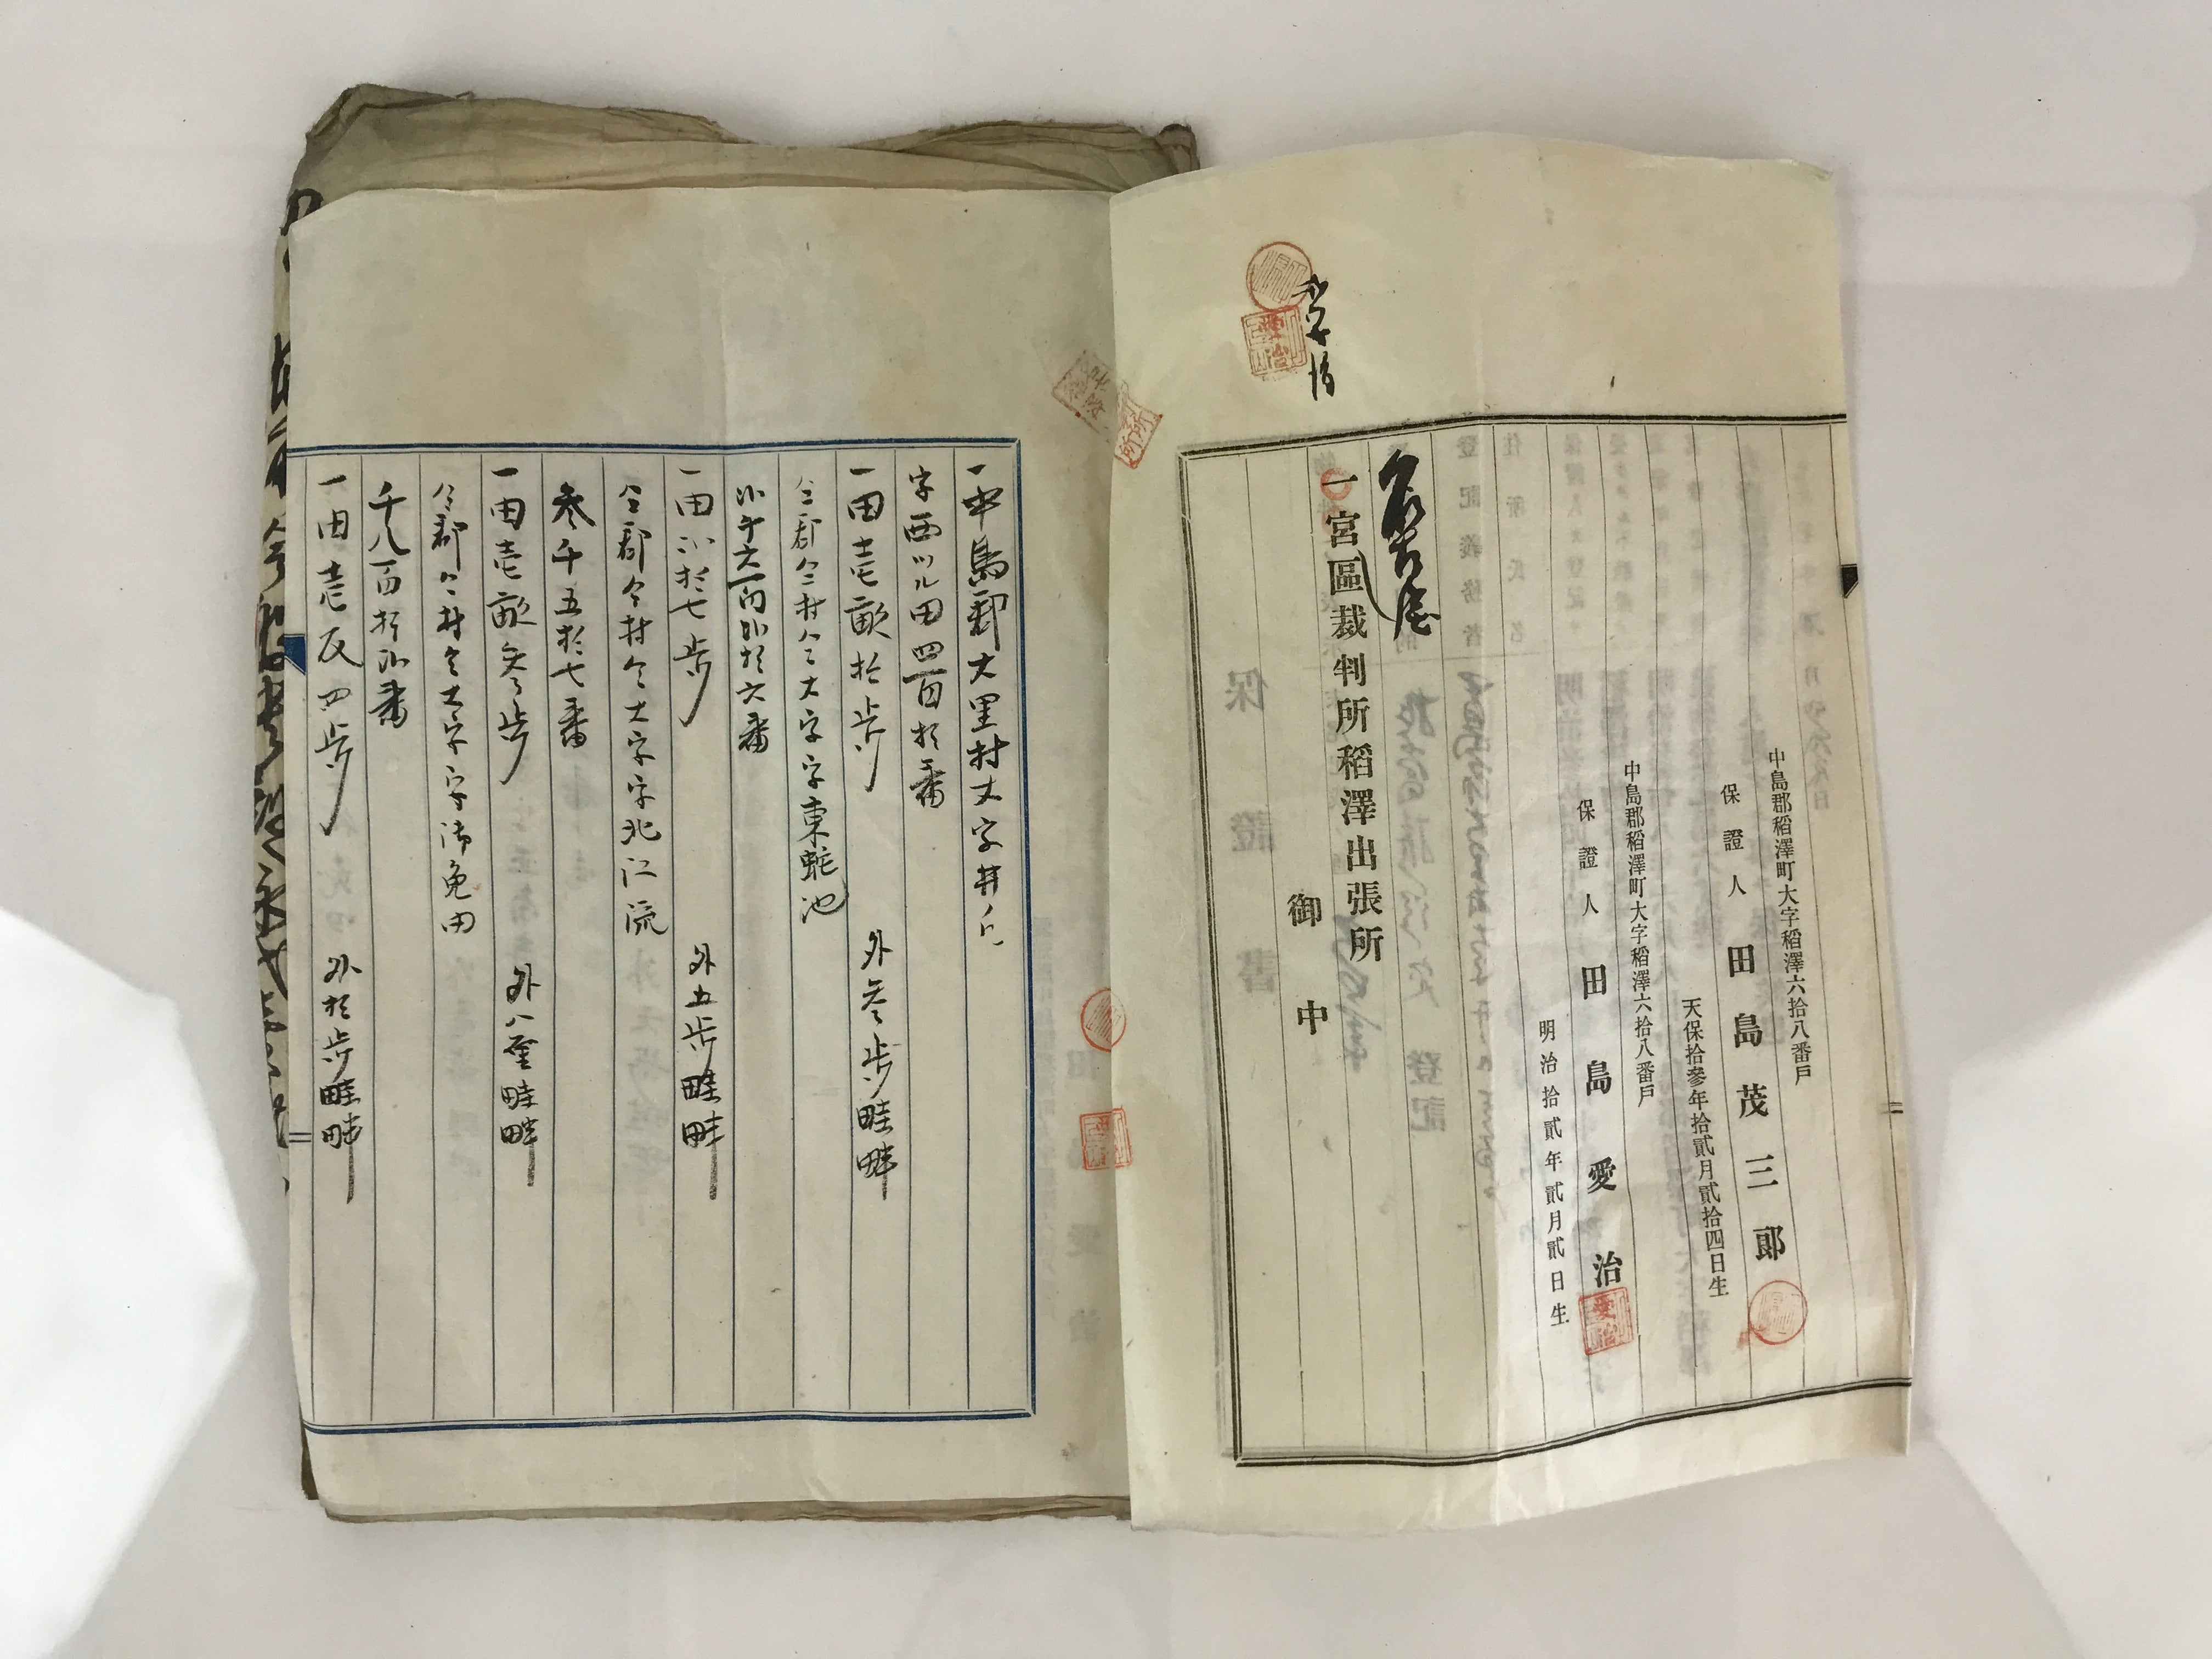 Antique C1894 Japanese House Purchase Certificate Registration Meiji Period P30